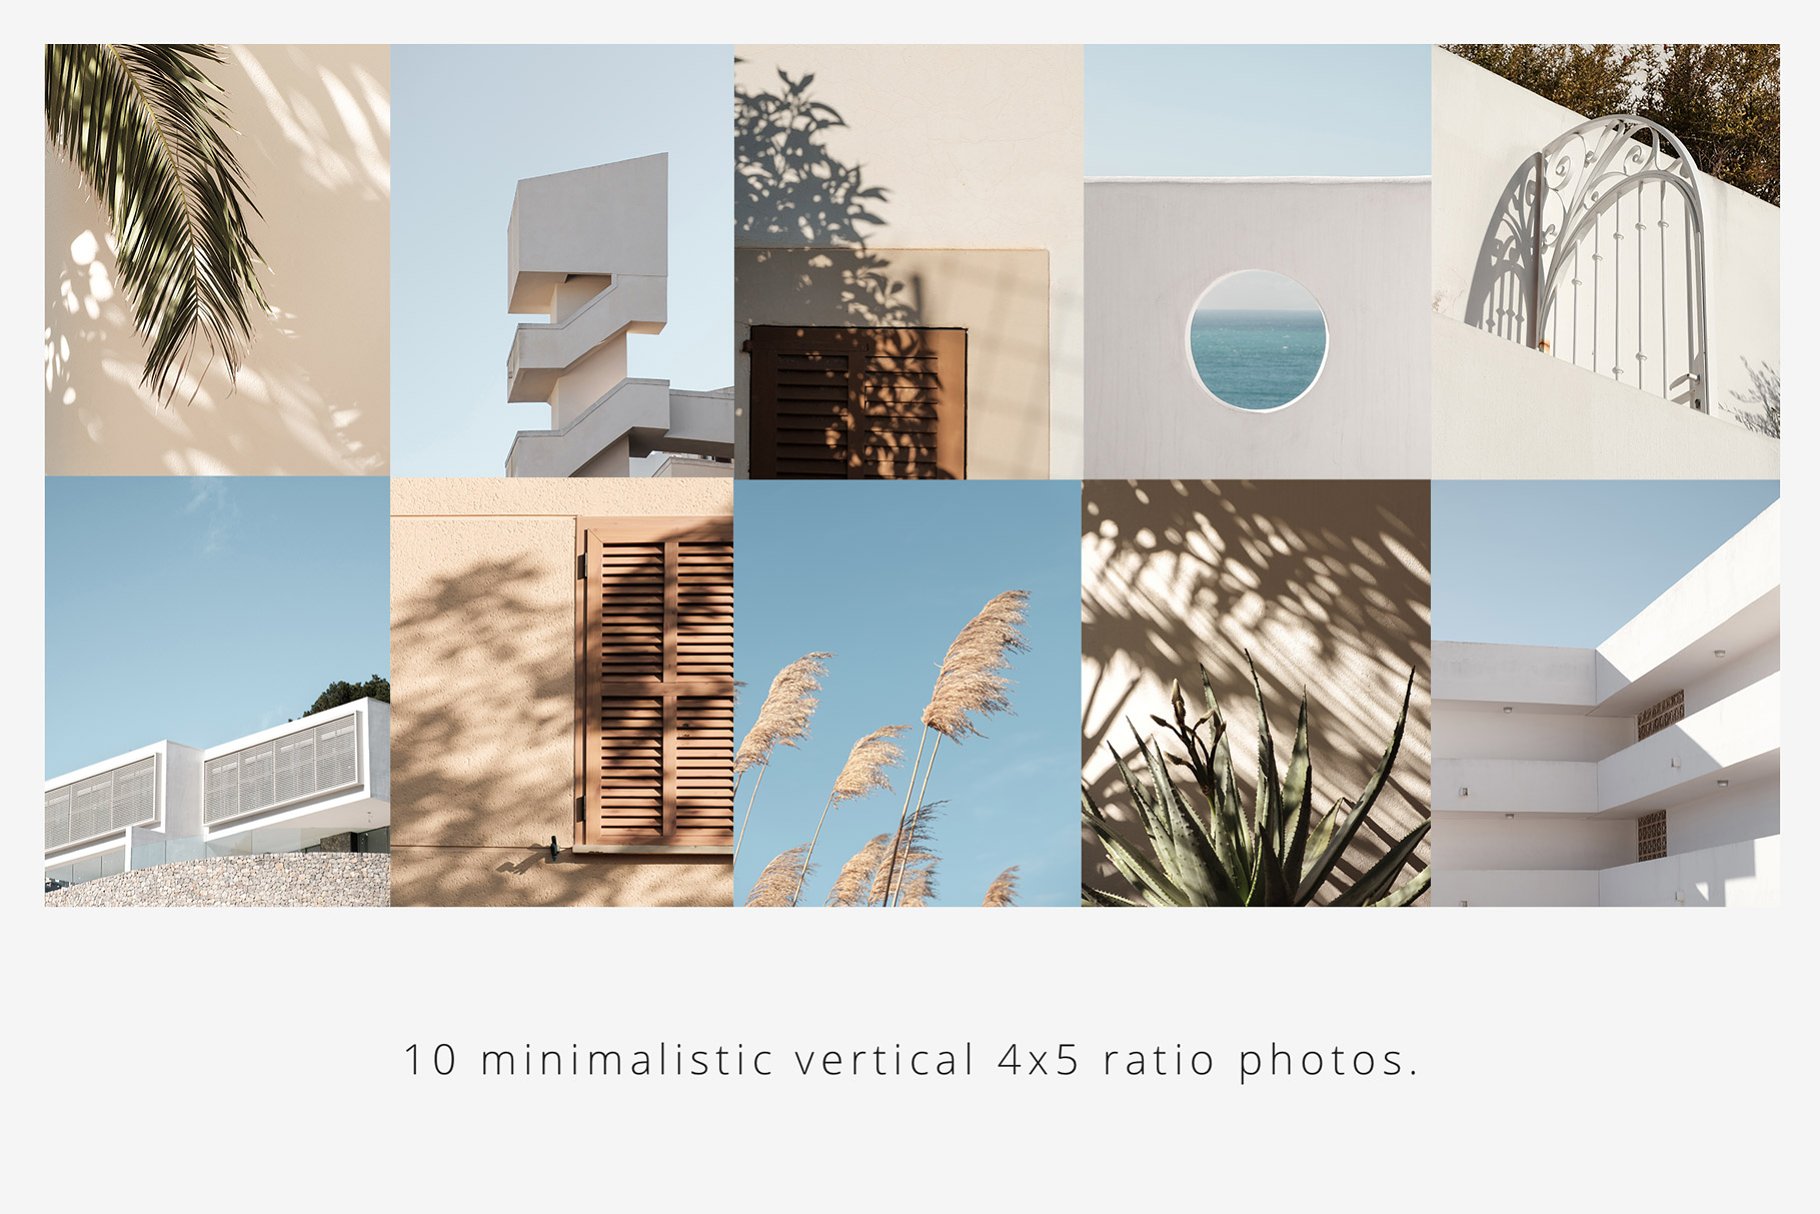 The lettering "10 minimalistic vertical 4x5 ratio photos" and 10 minimalist photos in light blue and light pink tones.